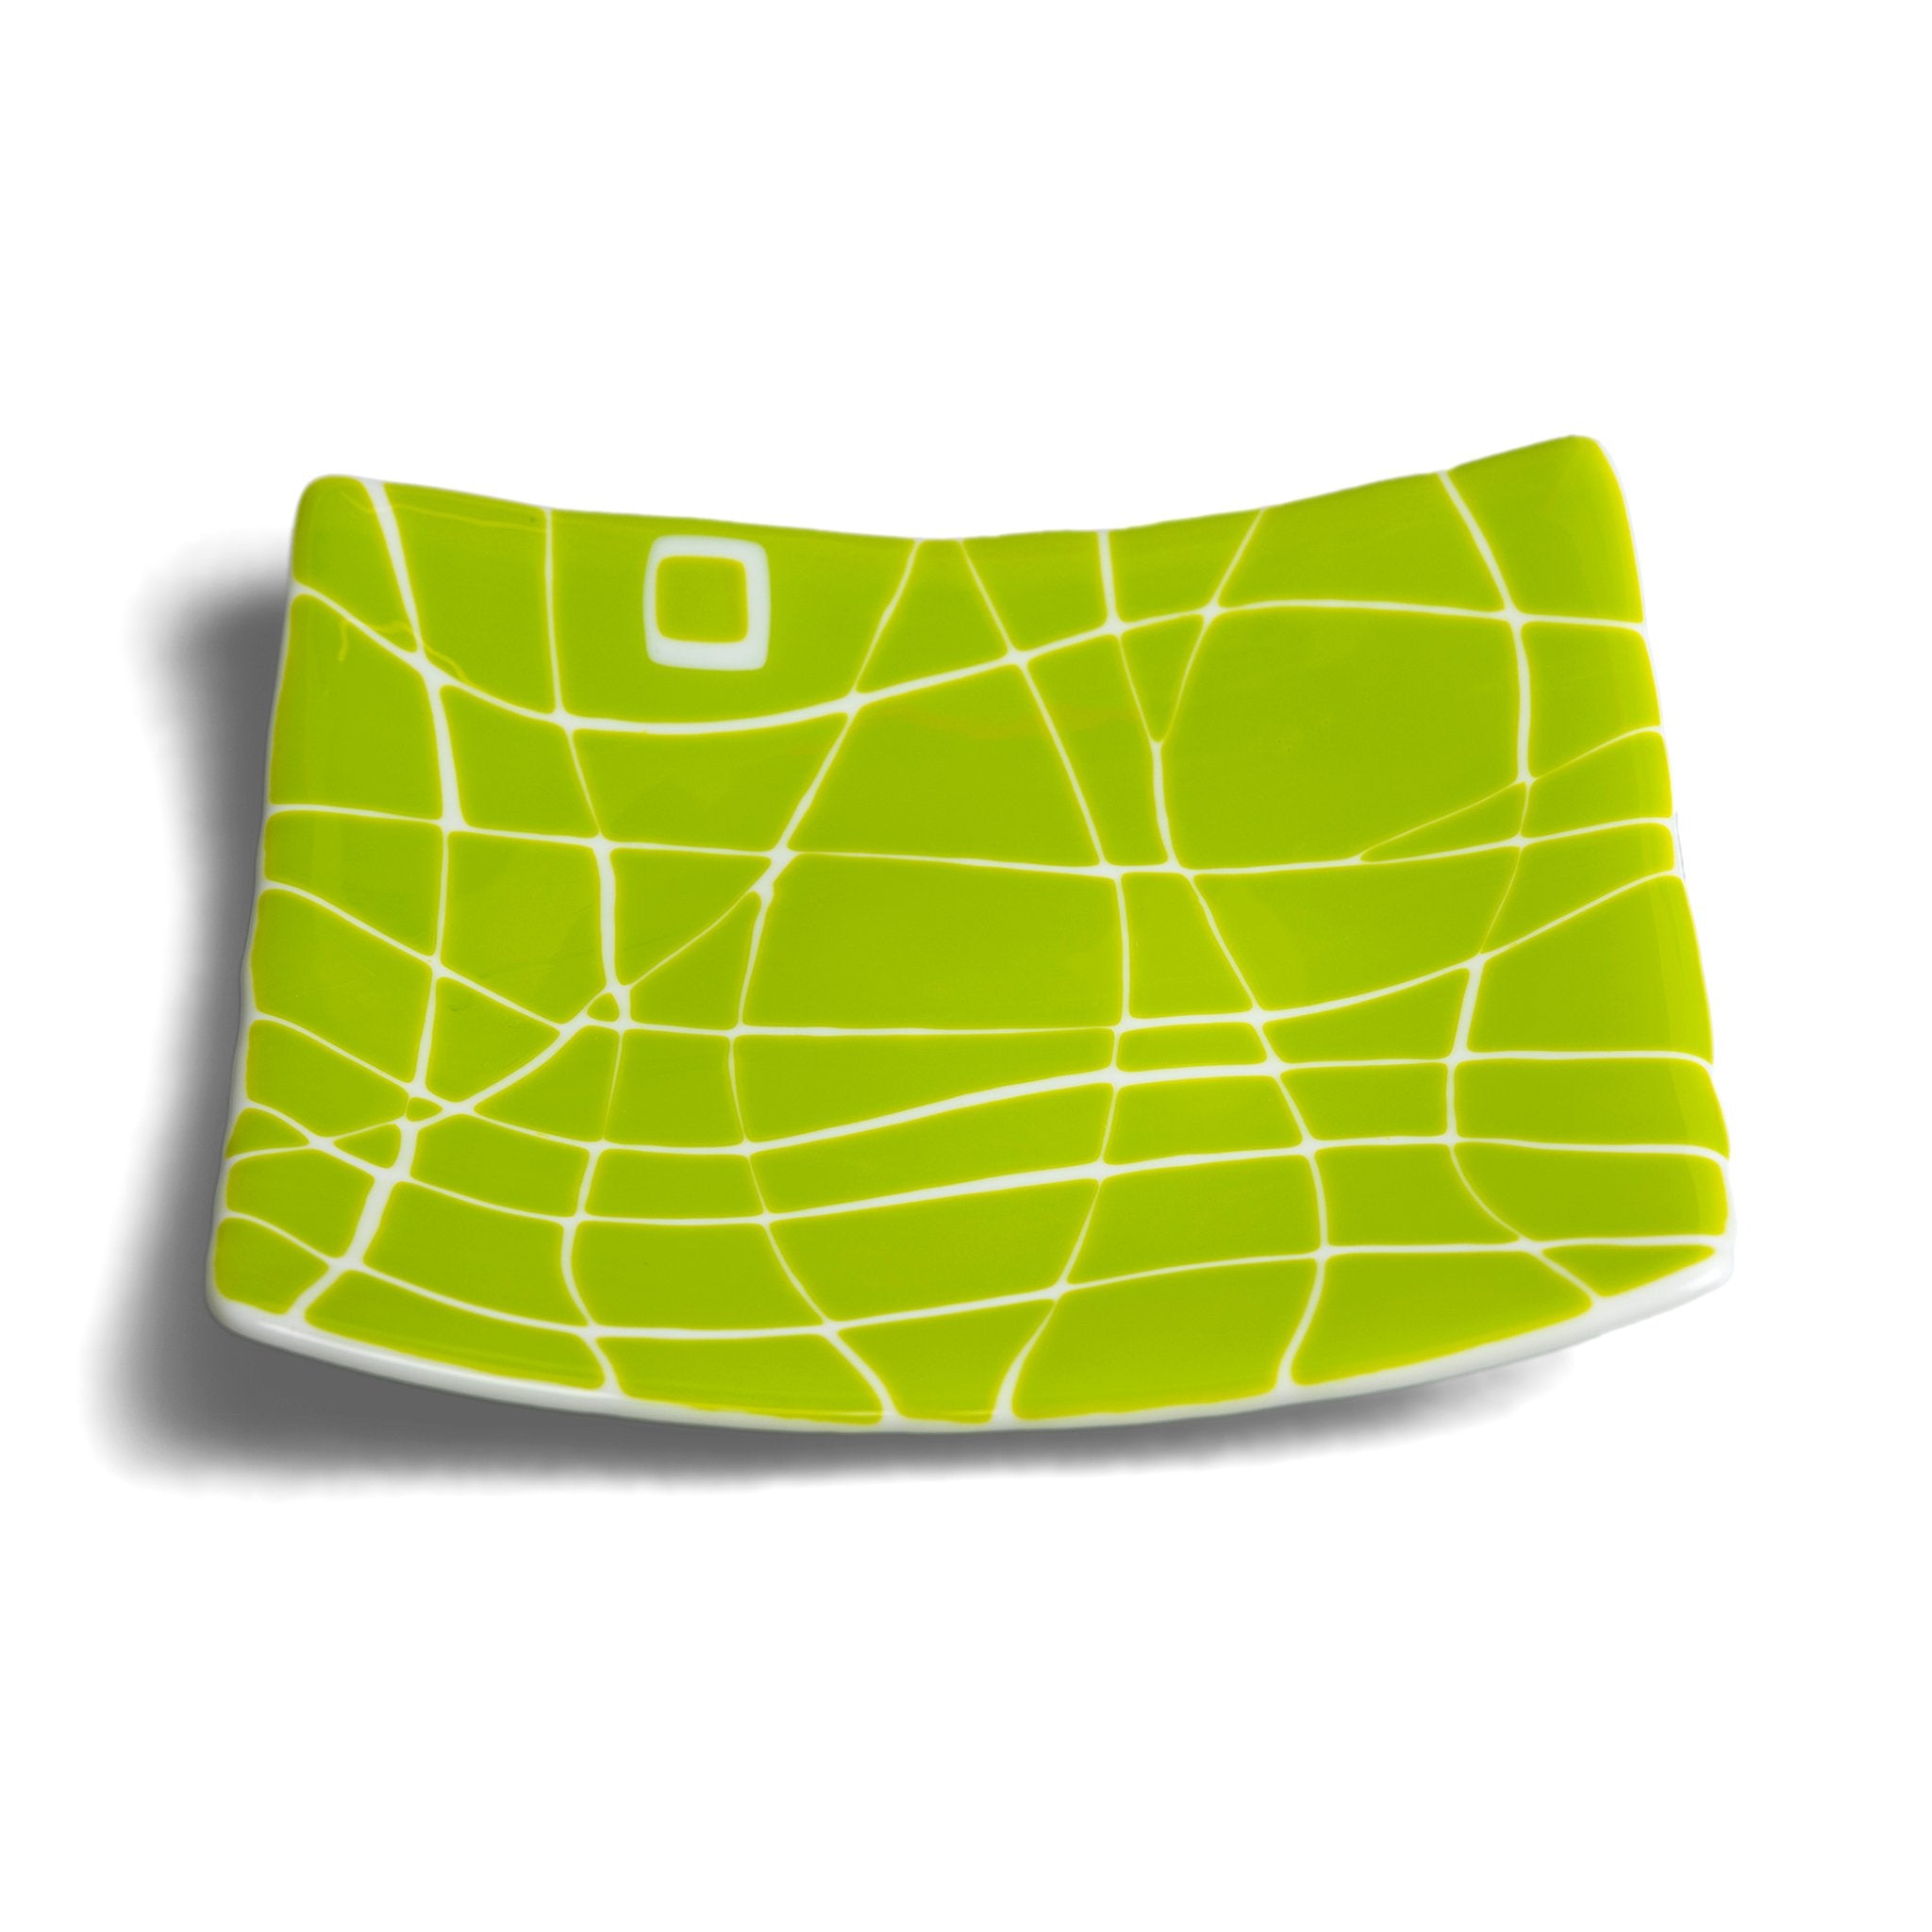 Spring Green Mod Square Channel Bowl